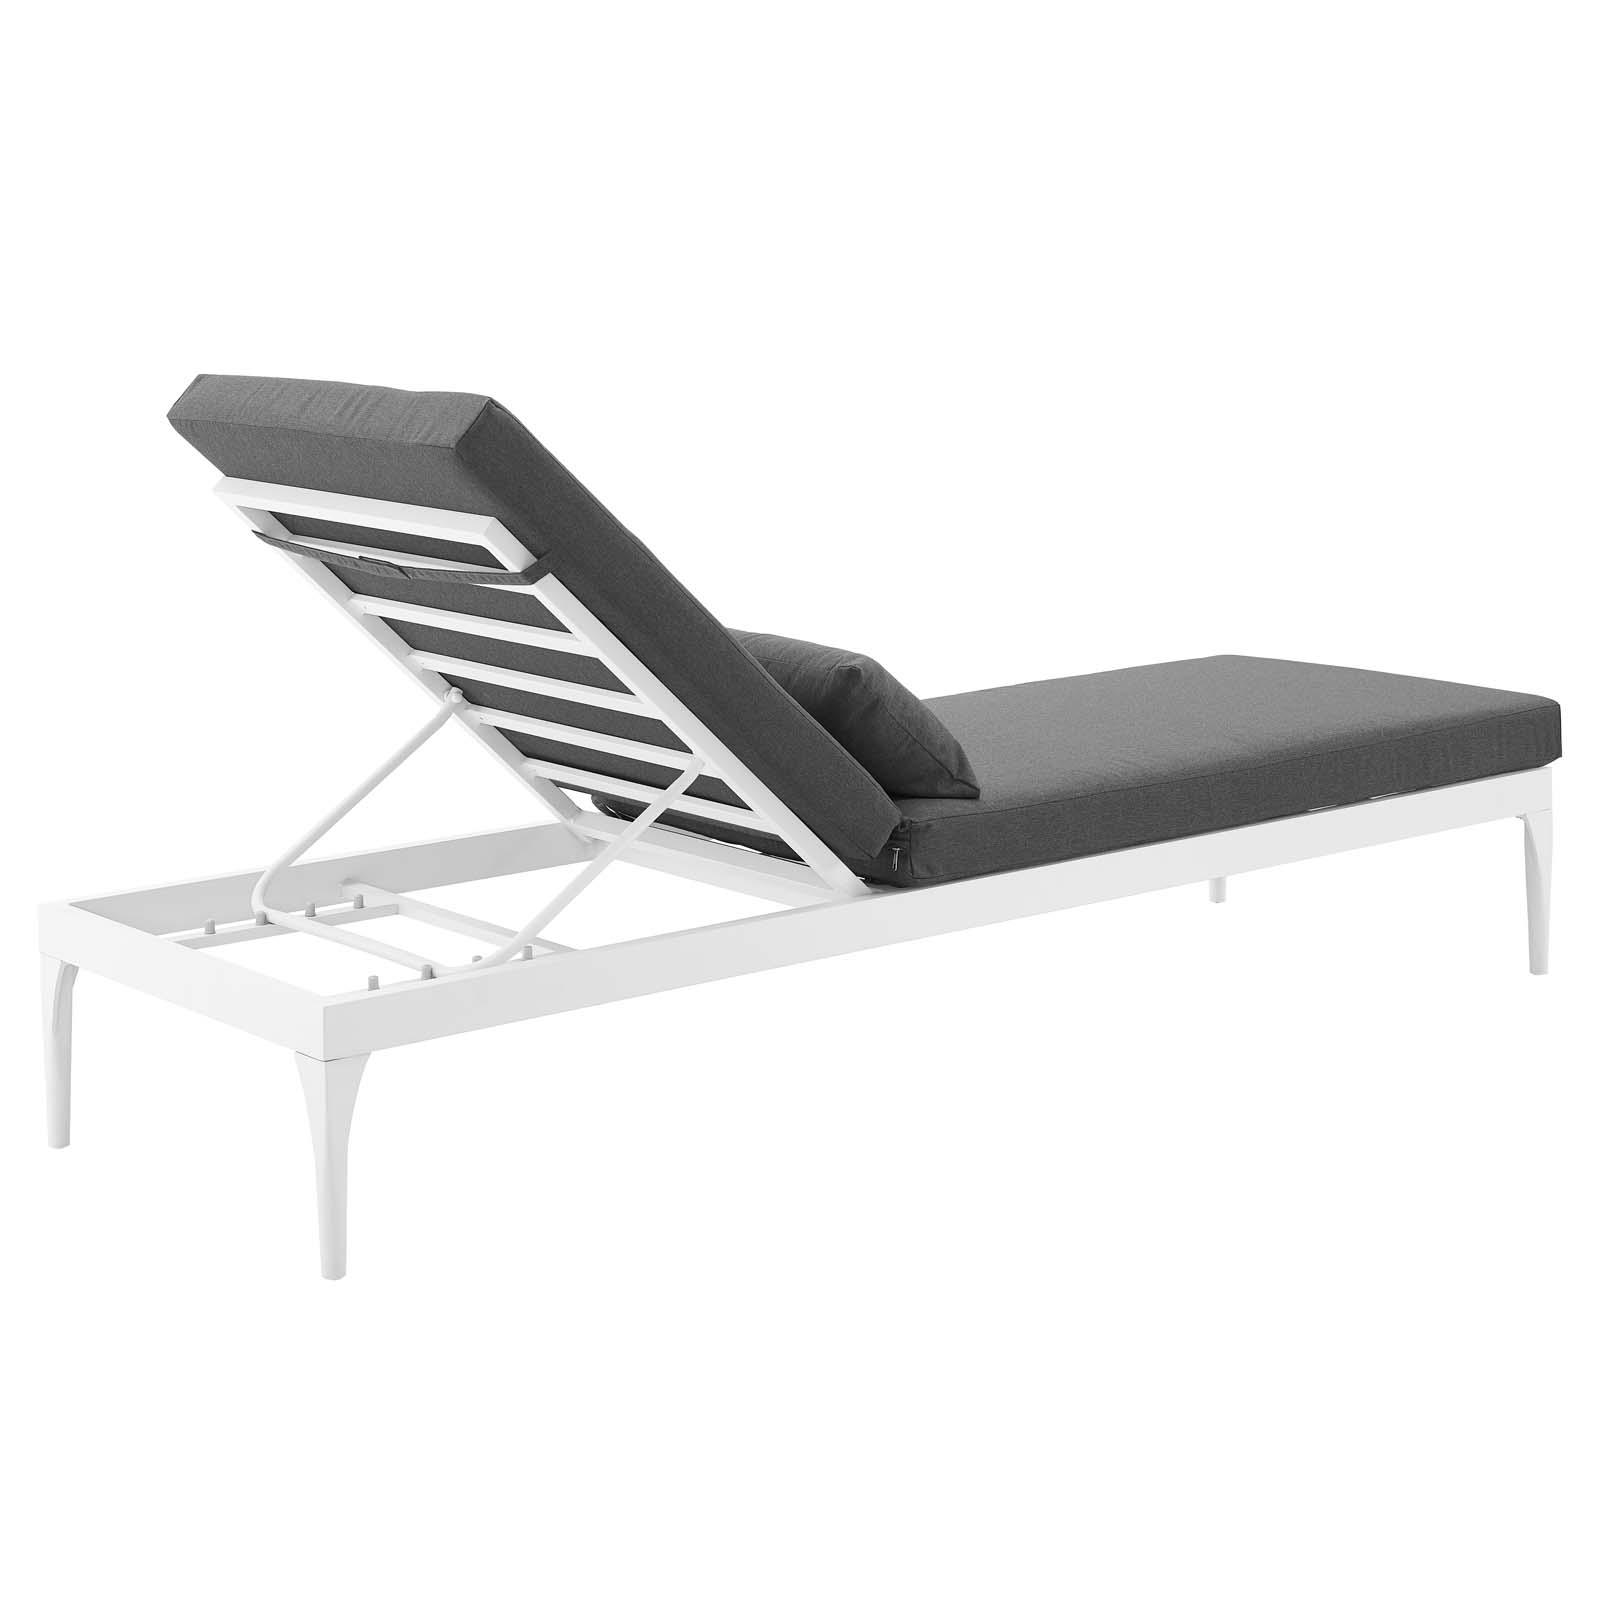 Modern Contemporary Urban Design Outdoor Patio Balcony Garden Furniture Lounge Chair Chaise, Fabric Metal Steel, White Grey Gray - image 5 of 7